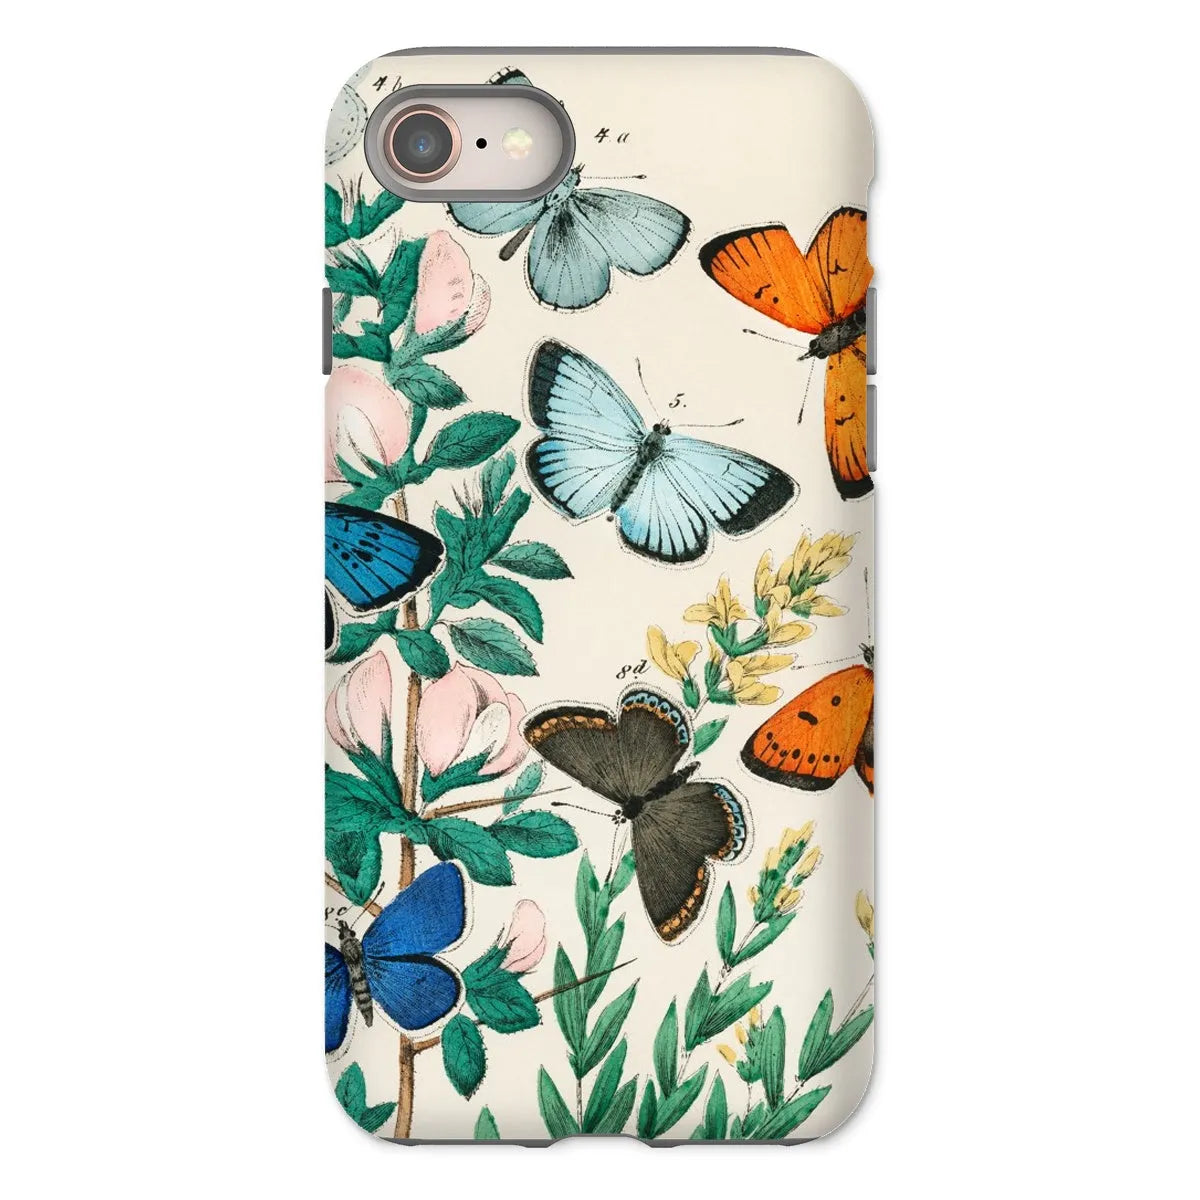 Another Butterfly Aesthetic Art Phone Case - William Forsell Kirby - Iphone 8 / Matte - Mobile Phone Cases - Aesthetic